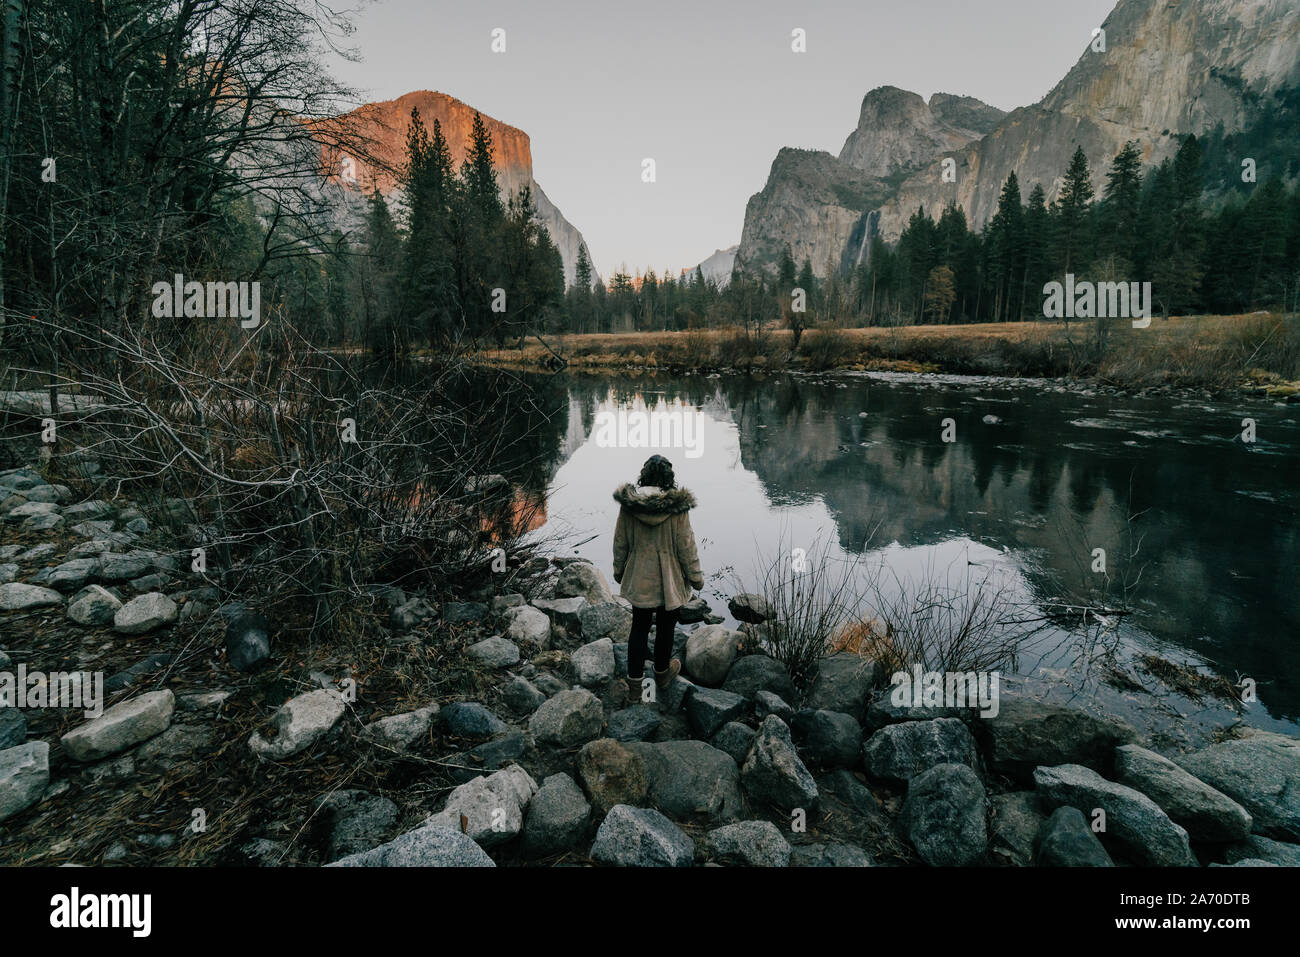 Female tourist in Yosemite looking at river against mountains Stock Photo